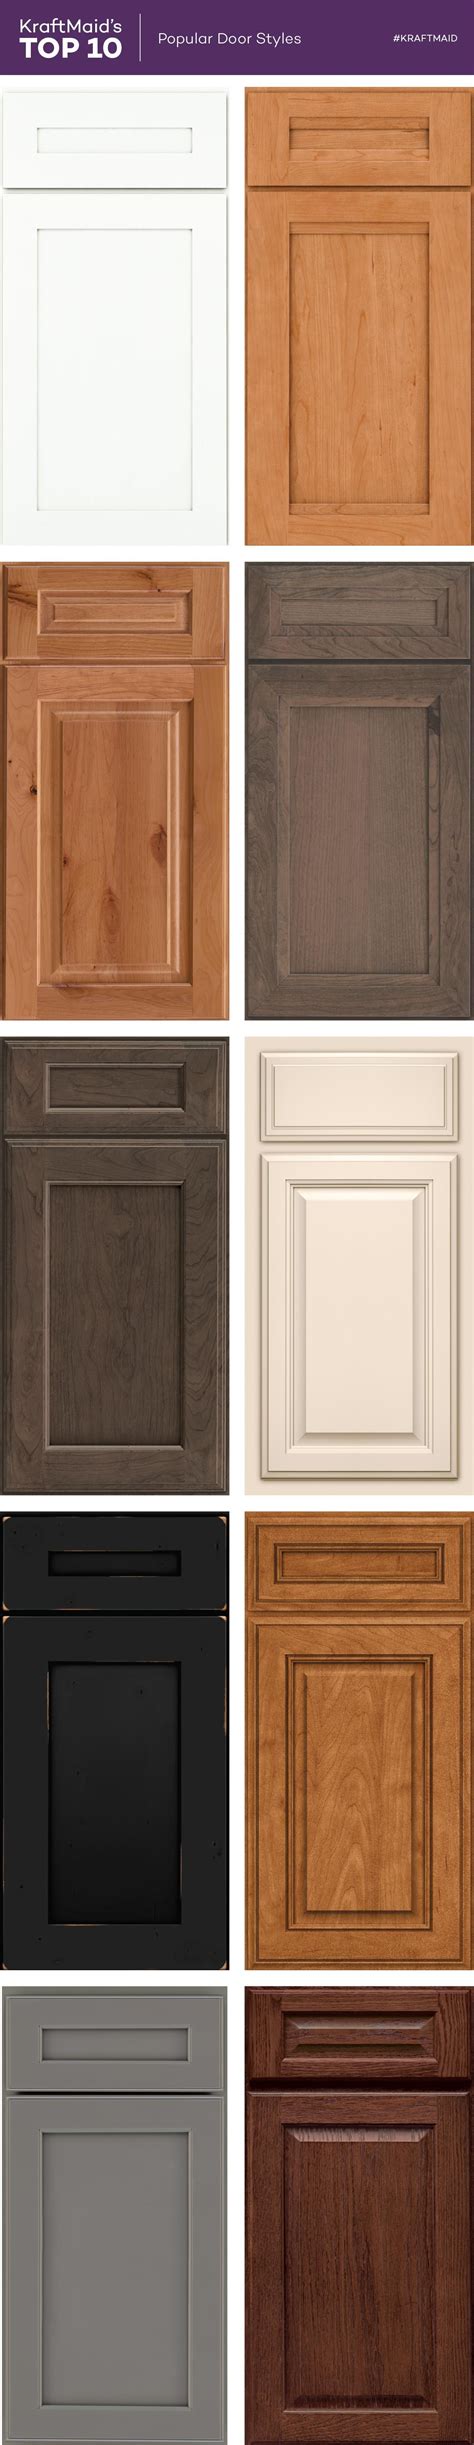 Kraftmaid® Shaker And Transitional Style Kitchen Cabinet Doors Are